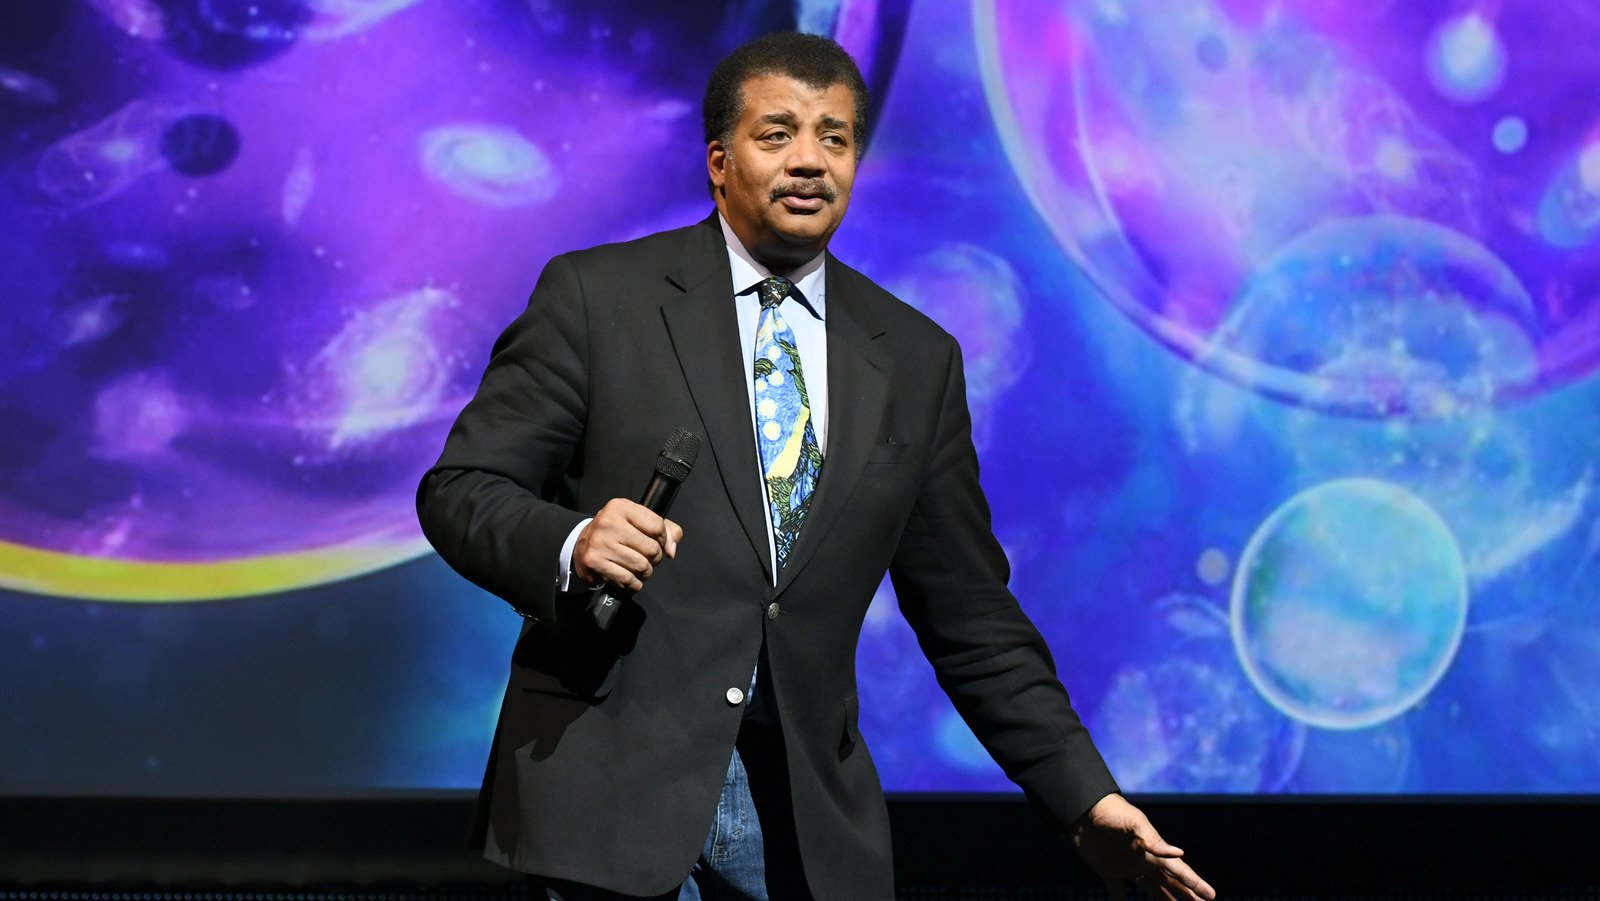 The Fateful Trip That Changed Neil deGrasse Tyson's Life Forever